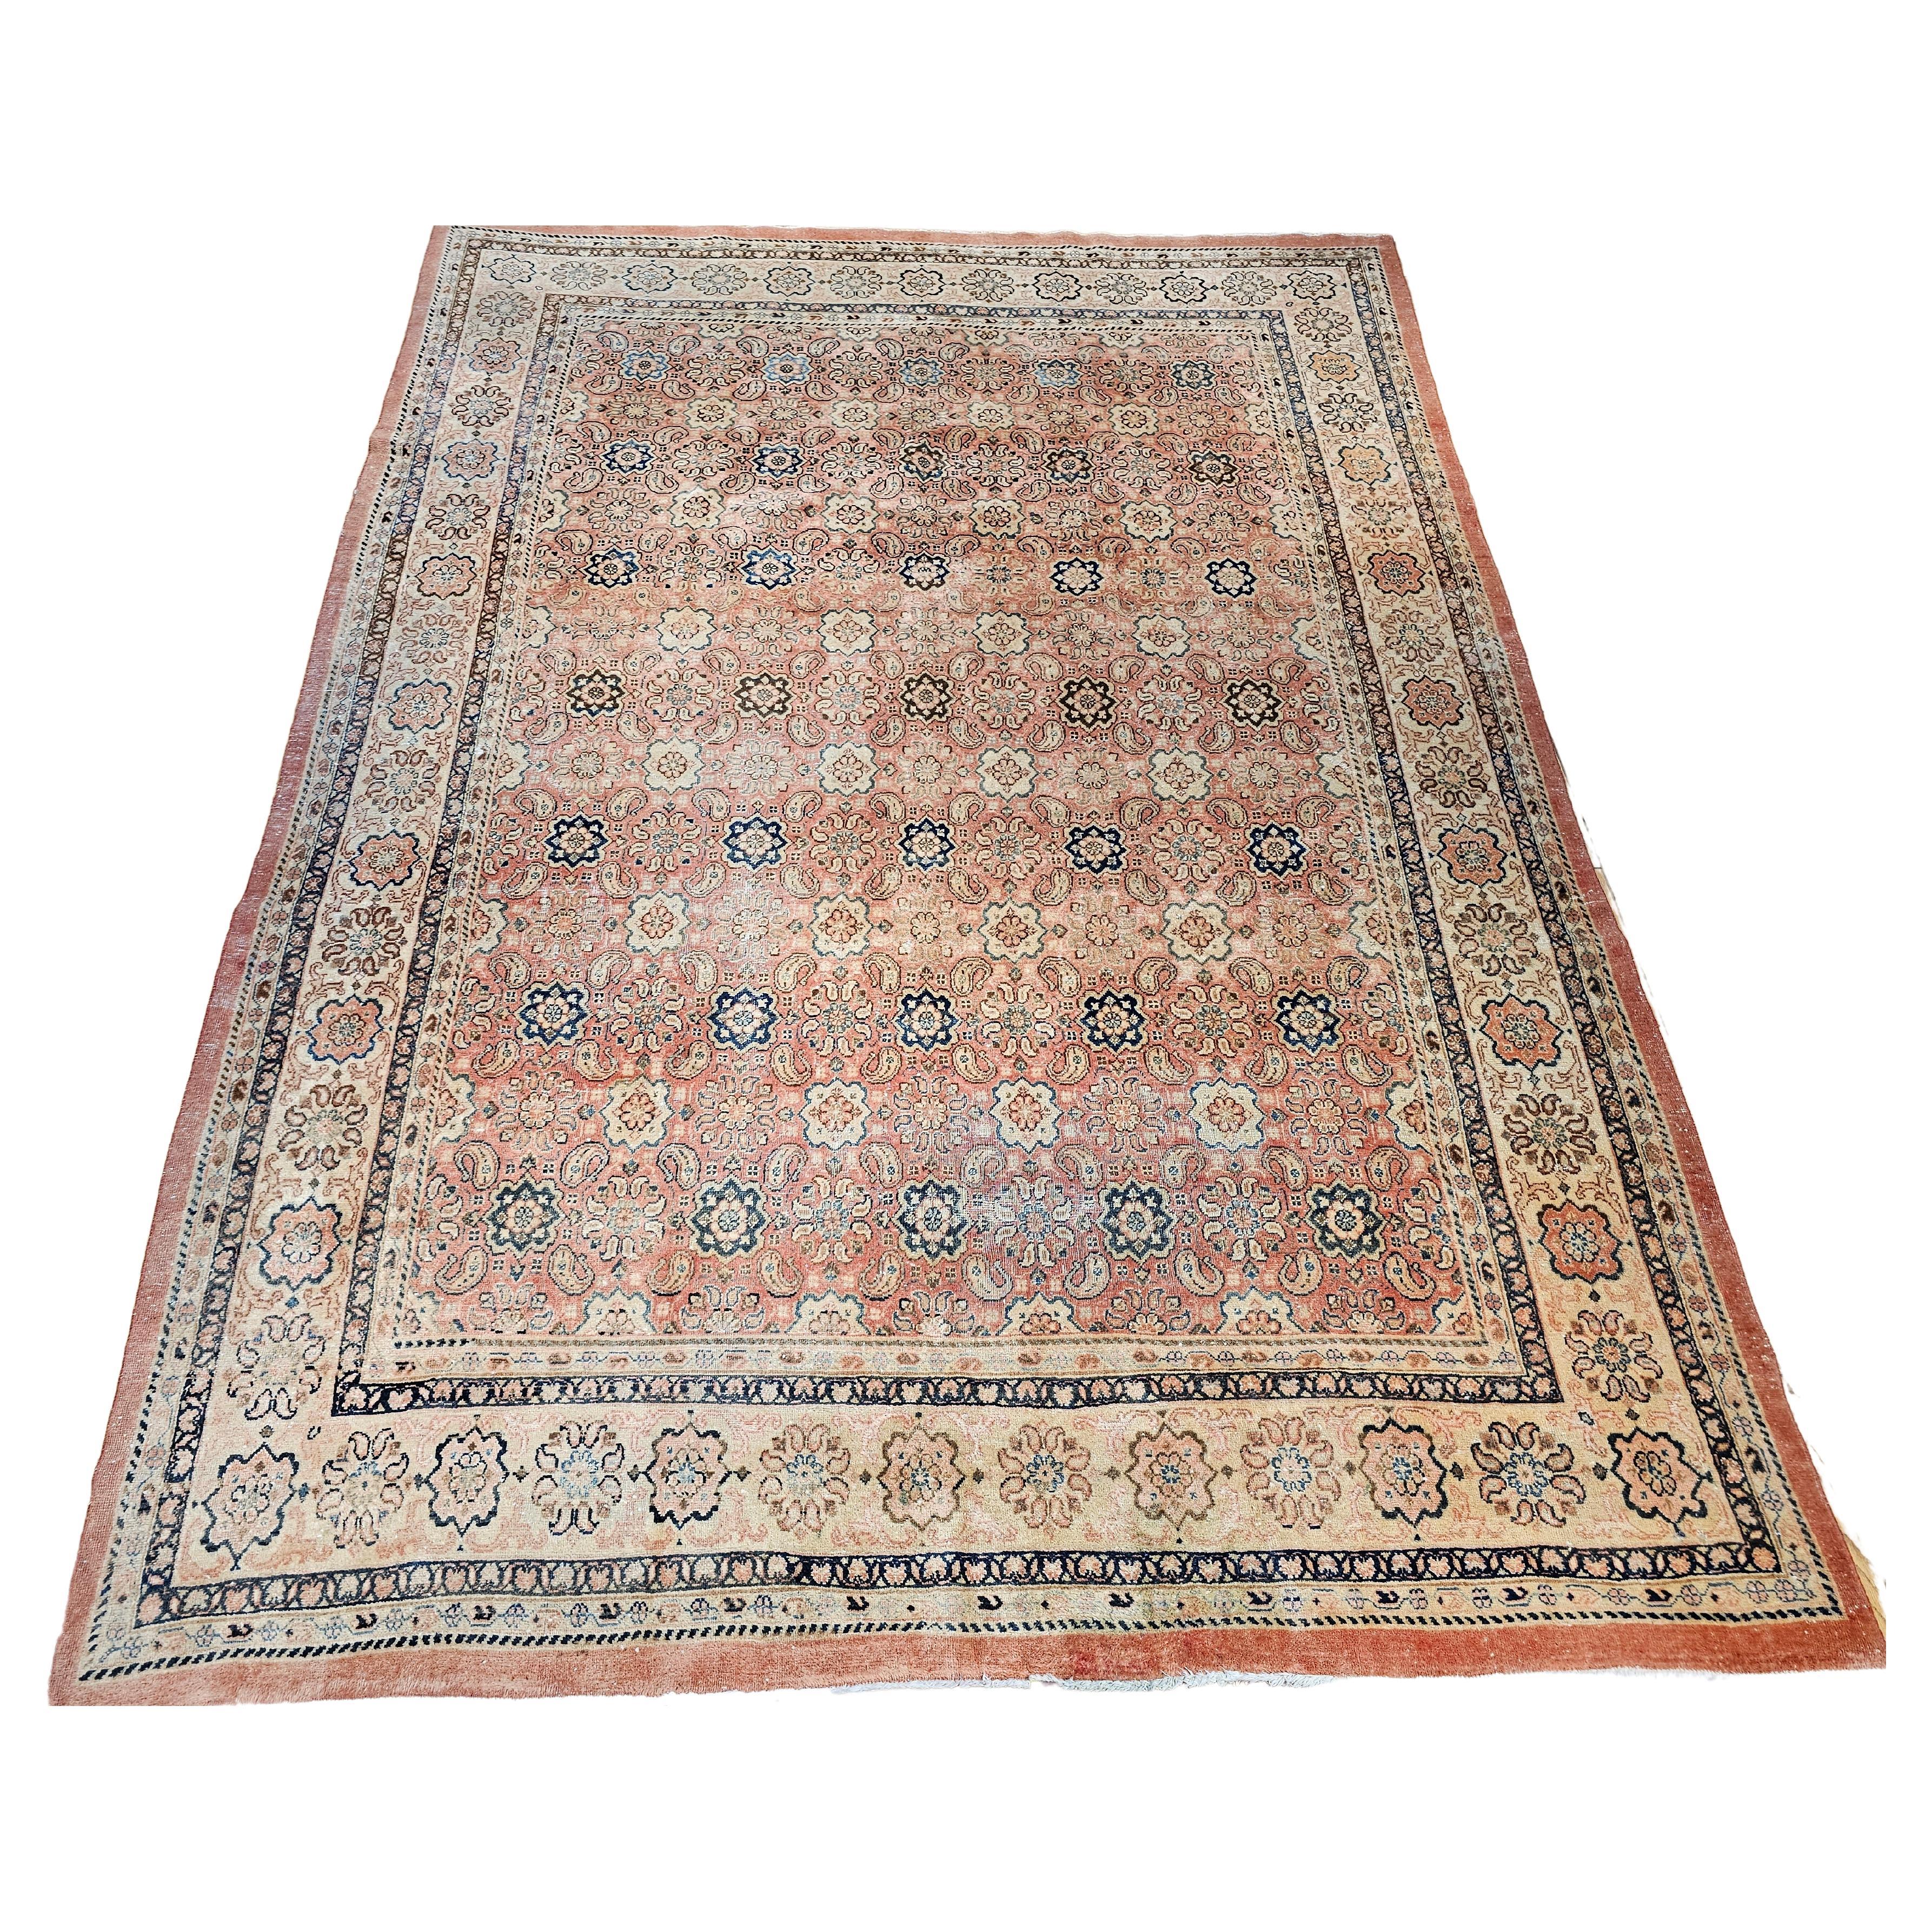  A wonderful vintage Persian Mahal Sultanabad rug with a unique all over geometric pattern  set in a pink to pale pink field color with small medallions and paisley forms throughout.   The small medallions have abrash colors of navy blue to pale